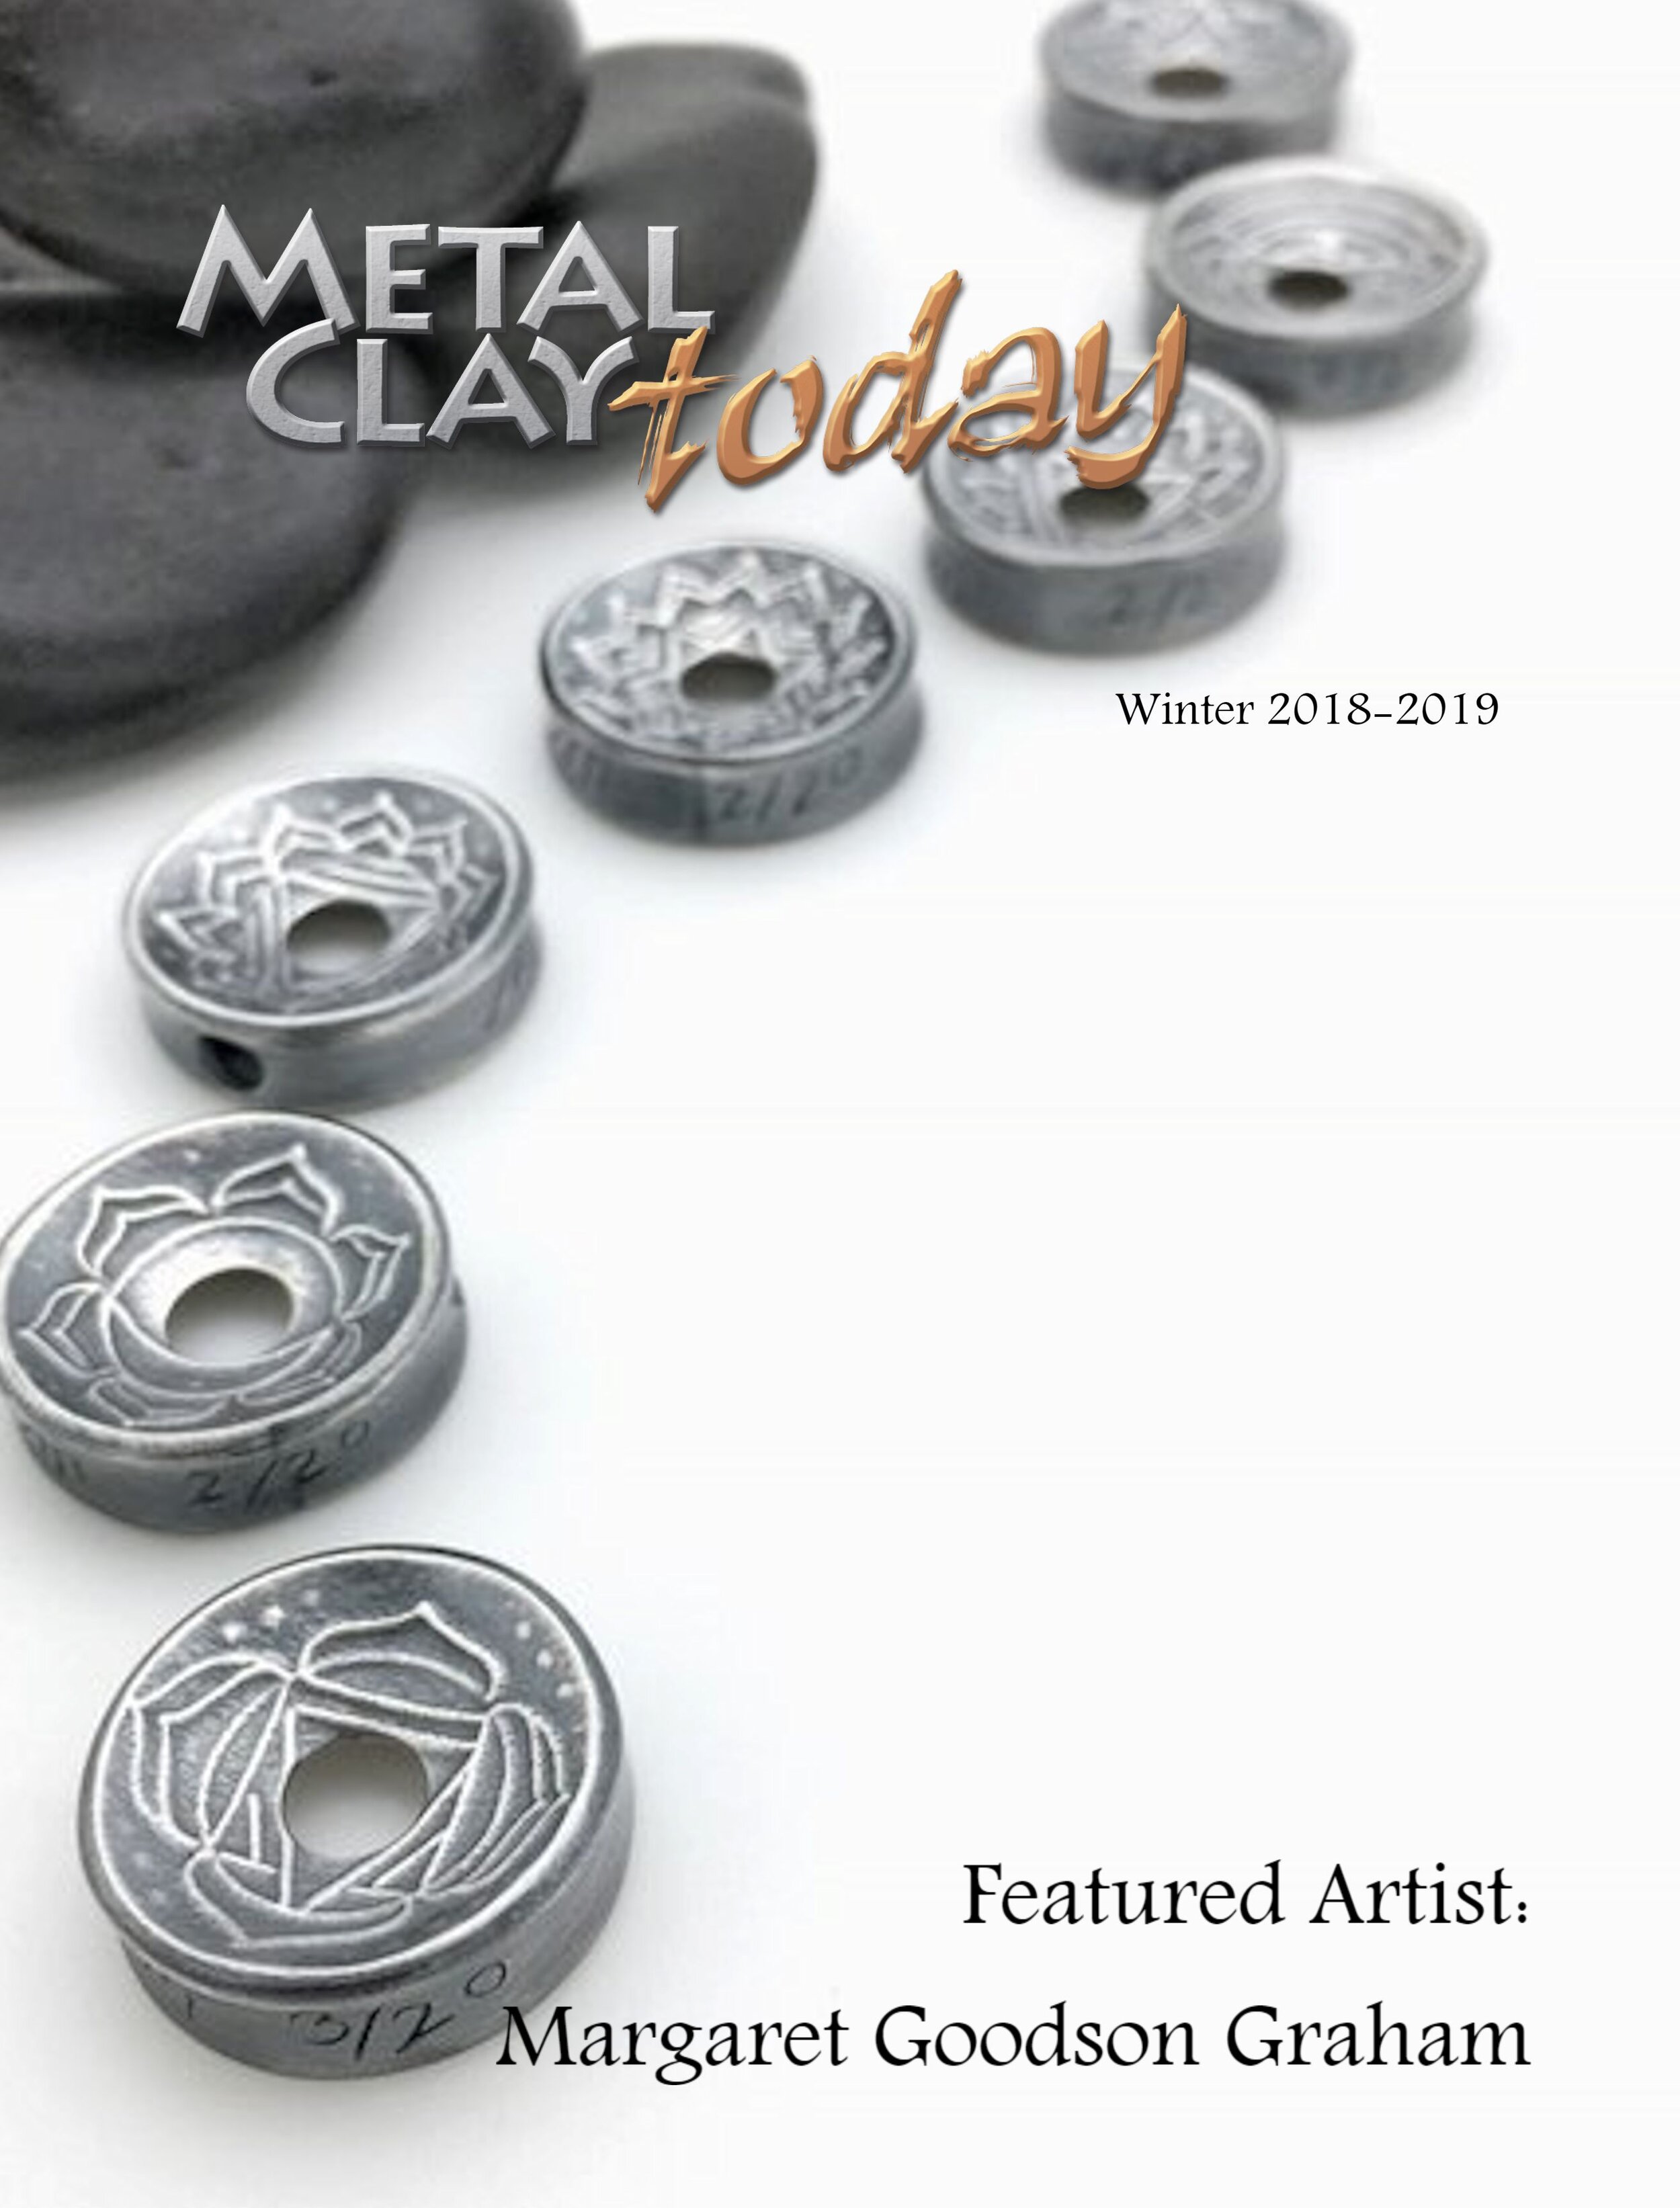 Metal Clay Today Winter 2018-2019